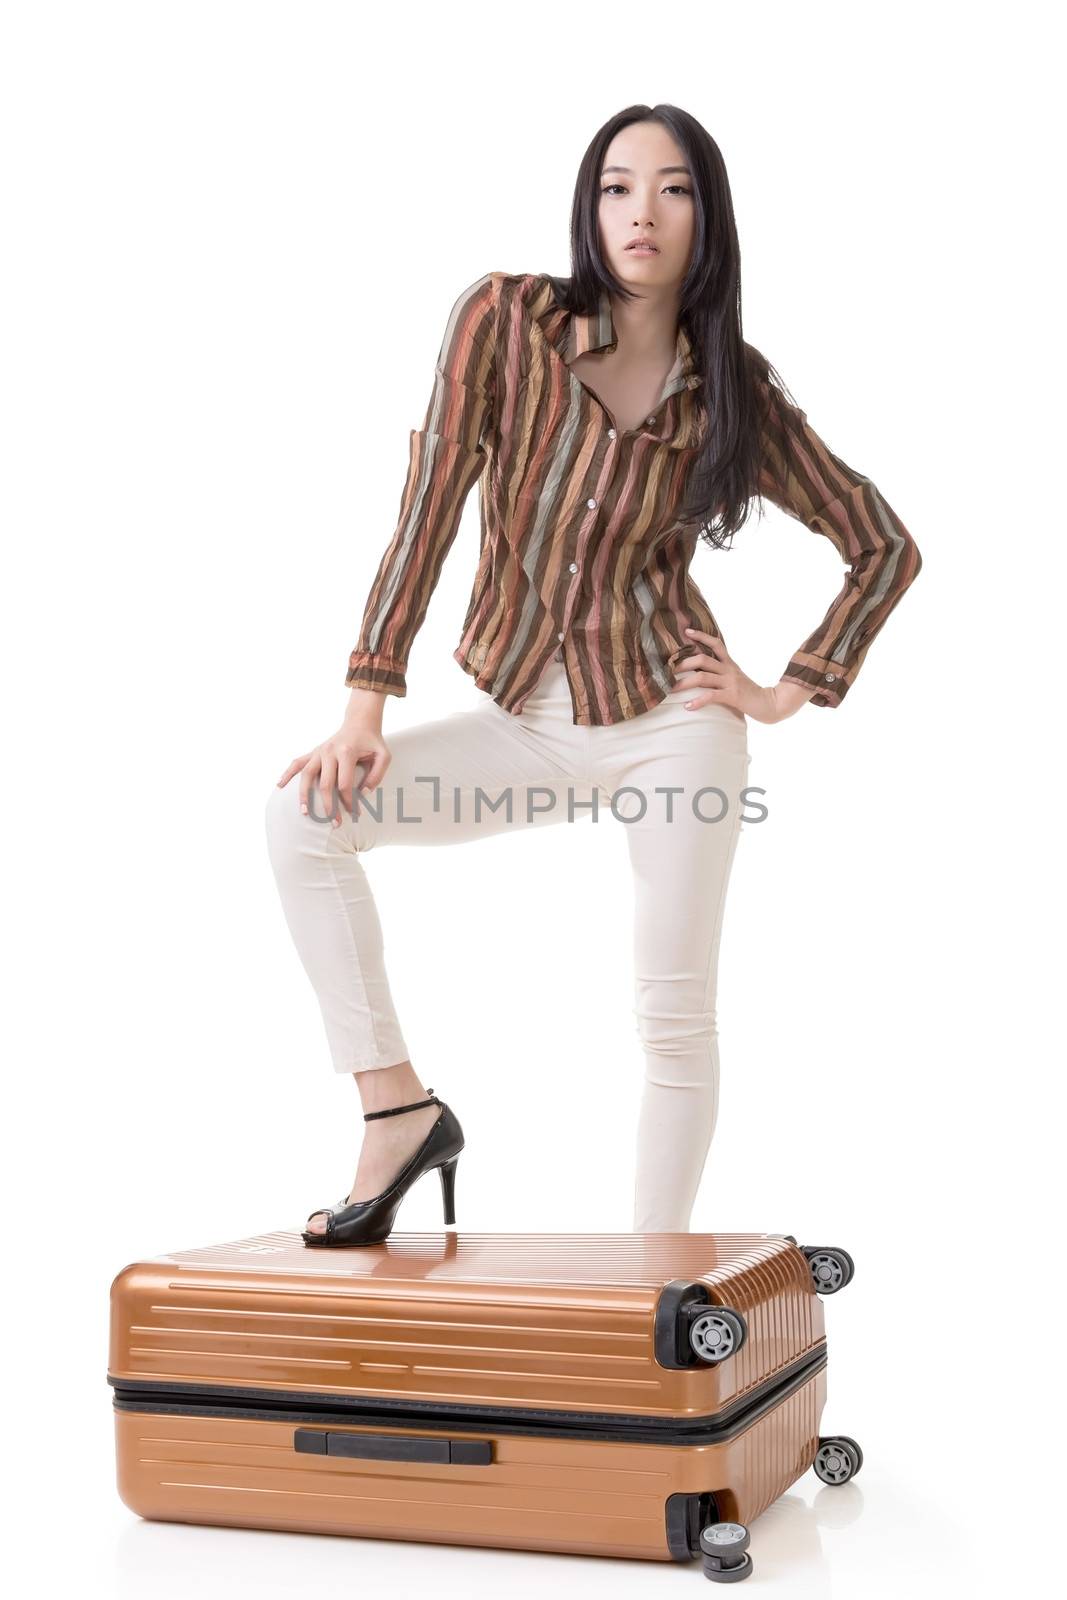 Modern Asian woman stand on a luggage, full length portrait on white background.